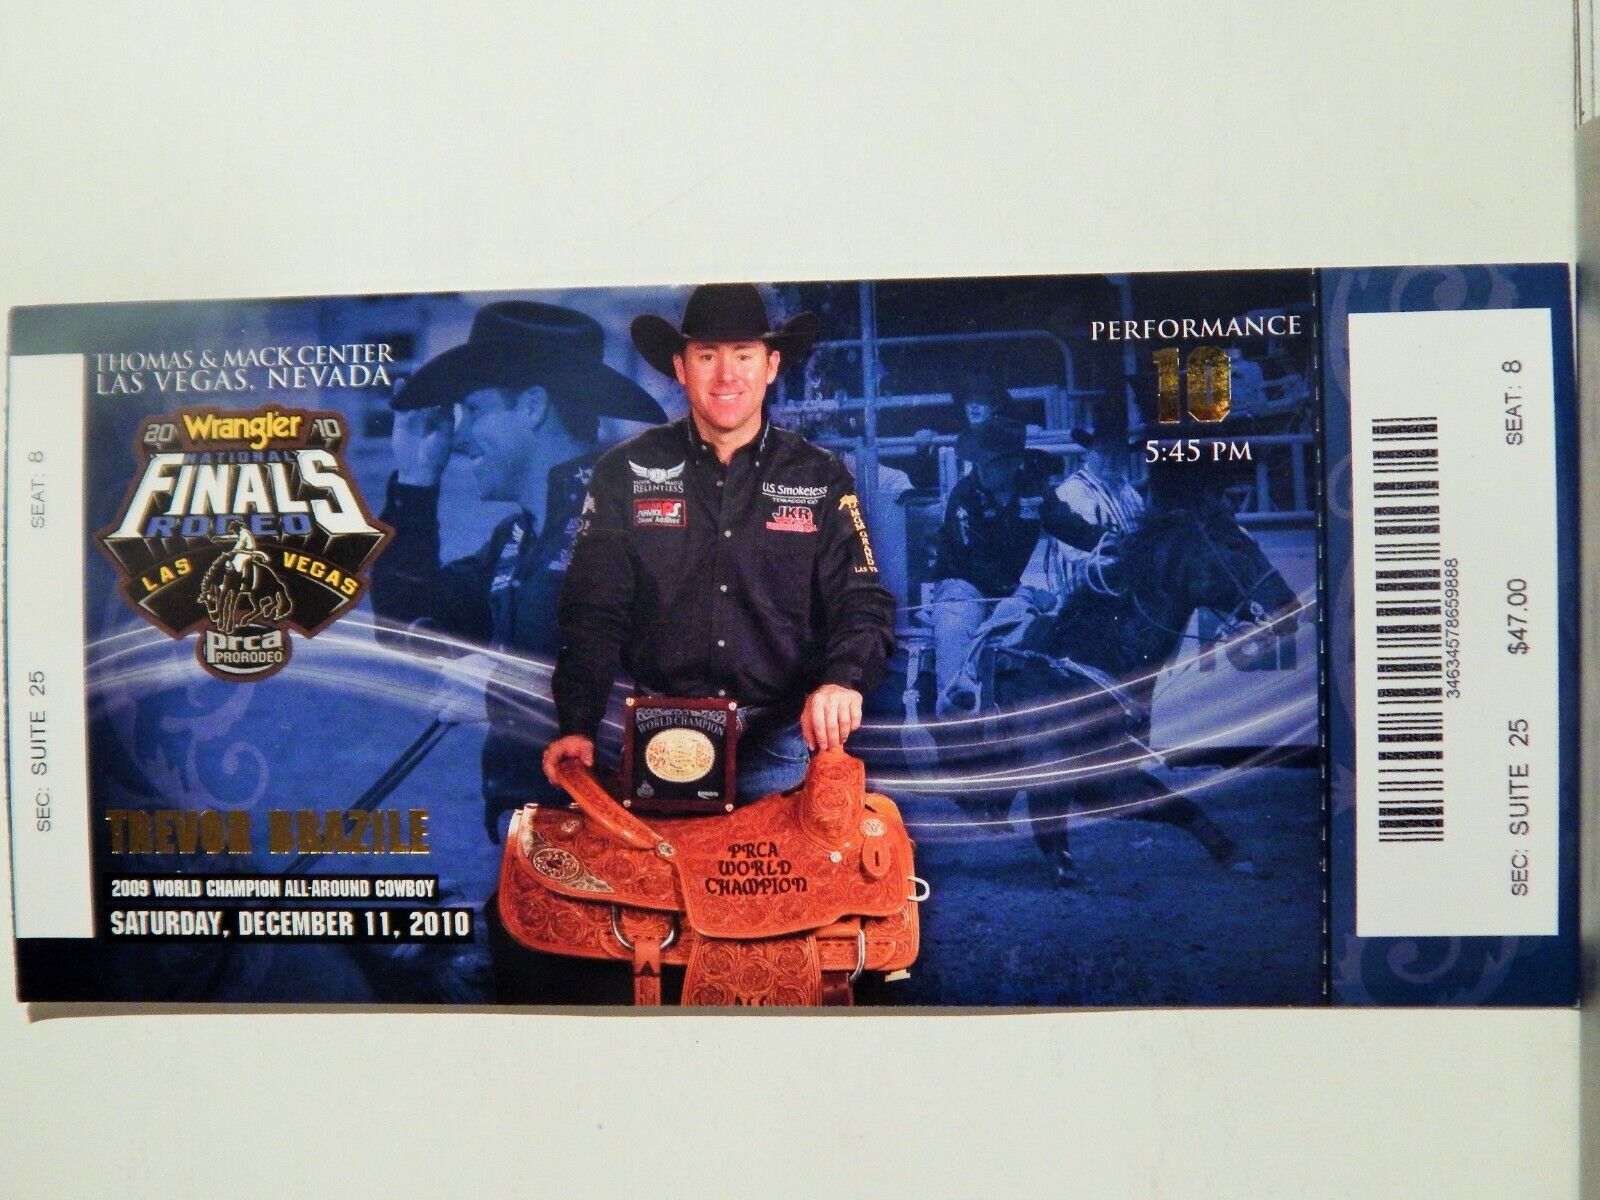 2010 NATIONAL FINALS RODEO LG ORIGINAL USED TICKET TREVOR BRAZILE COLOR Photo Poster painting